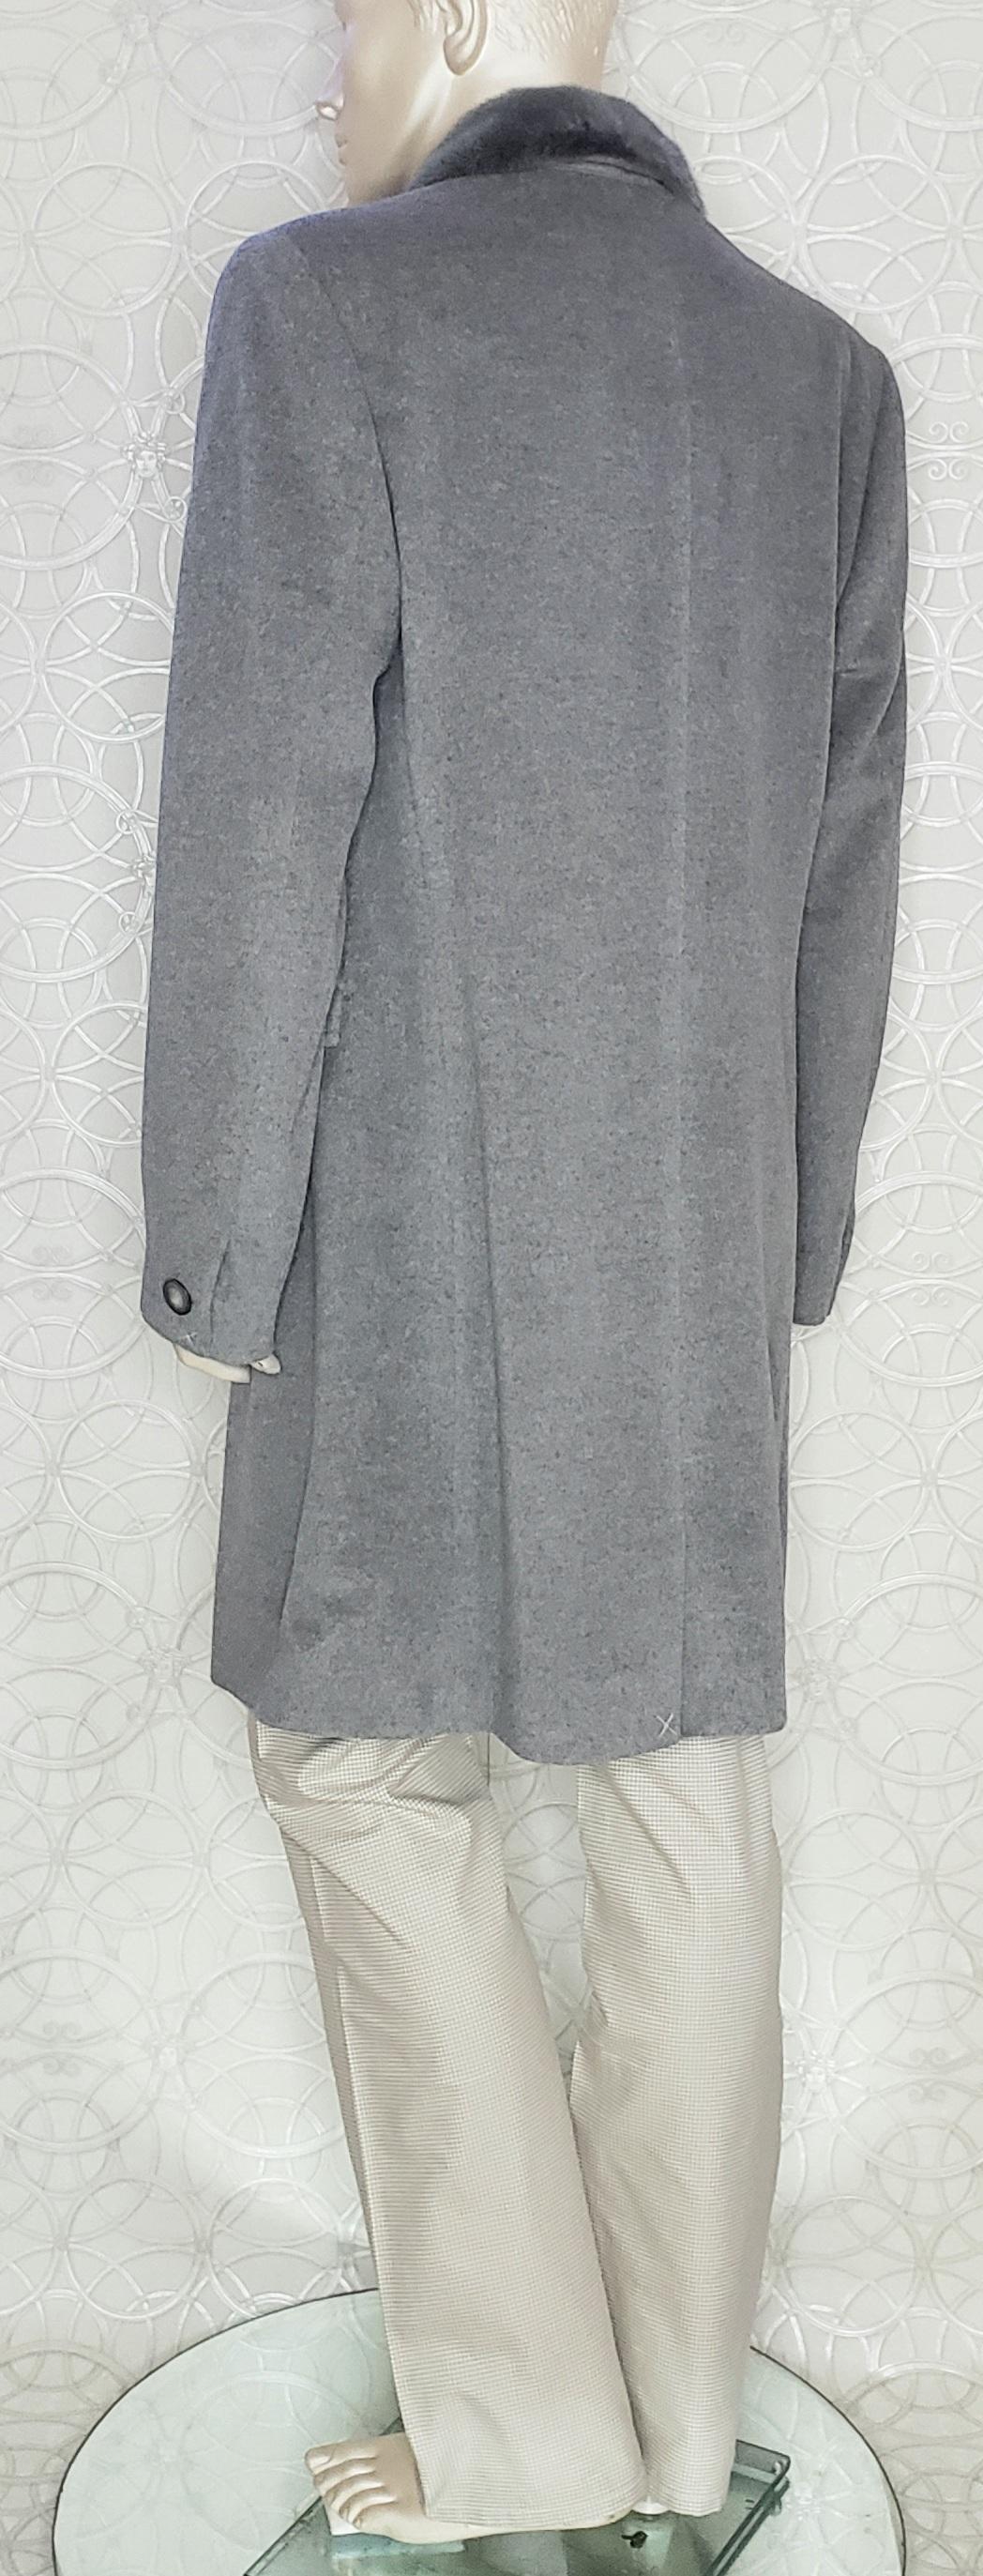 NEW VERSACE GRAY ANGORA COAT With MINK FUR COLLAR 54 - 2XL For Sale 2